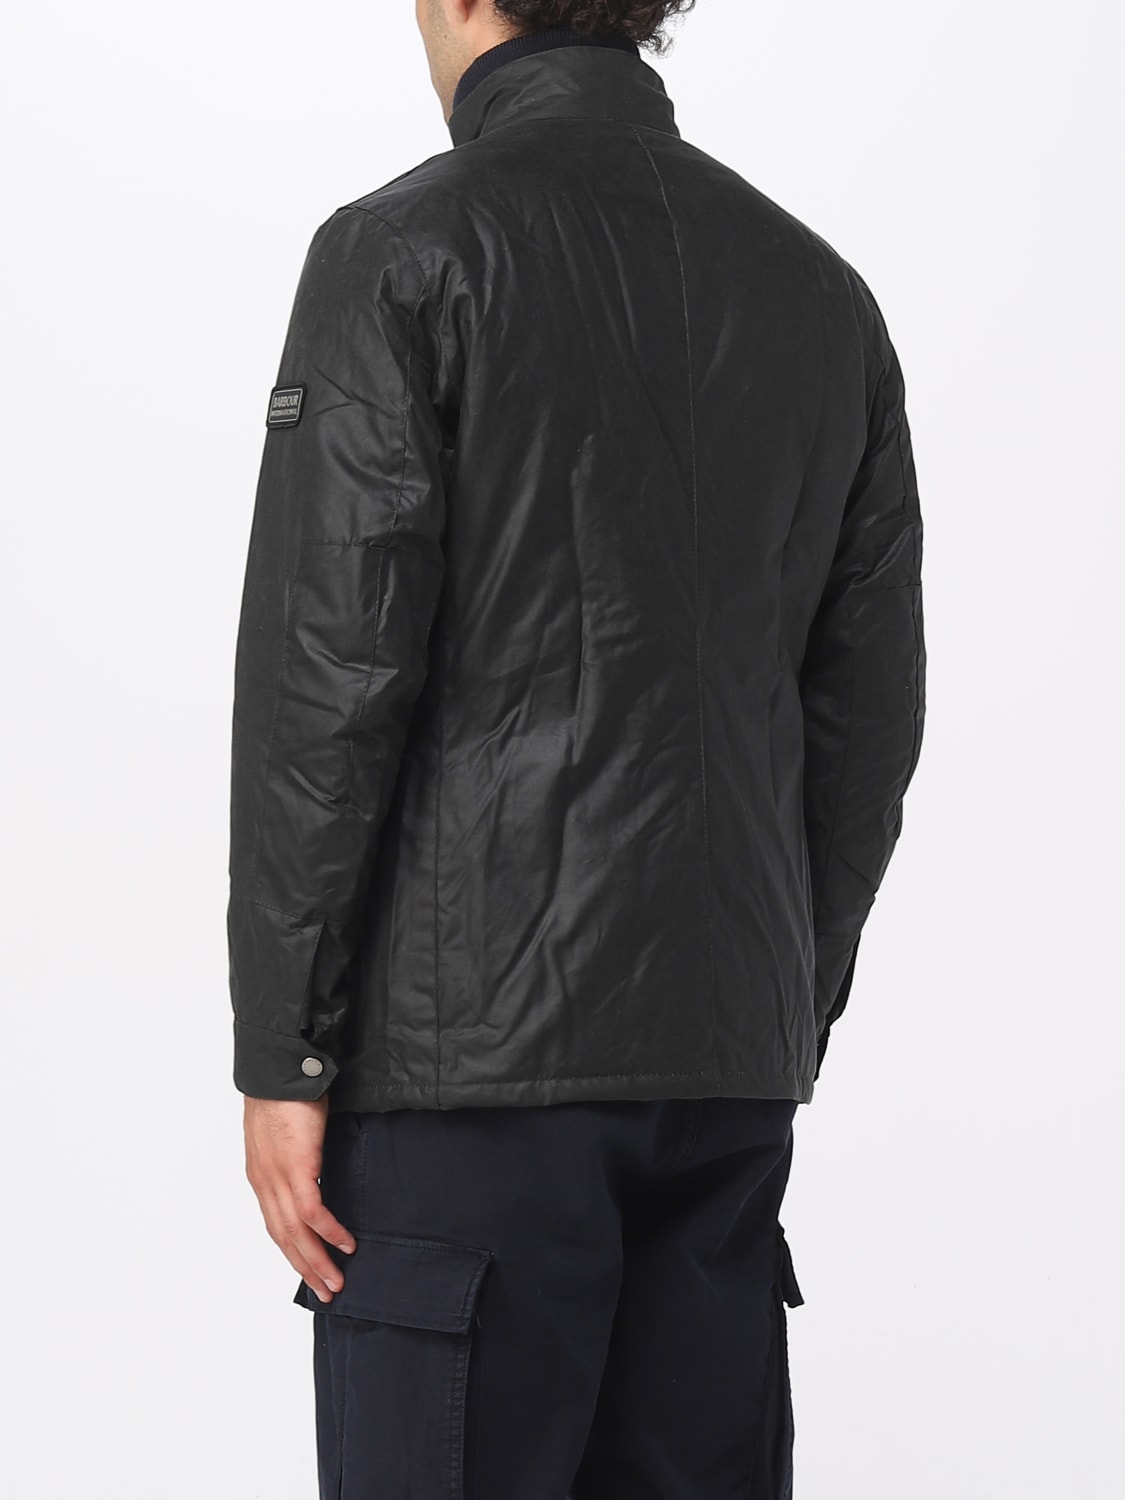 BARBOUR: jacket for man - Military | Barbour jacket MWX0337MWX online ...